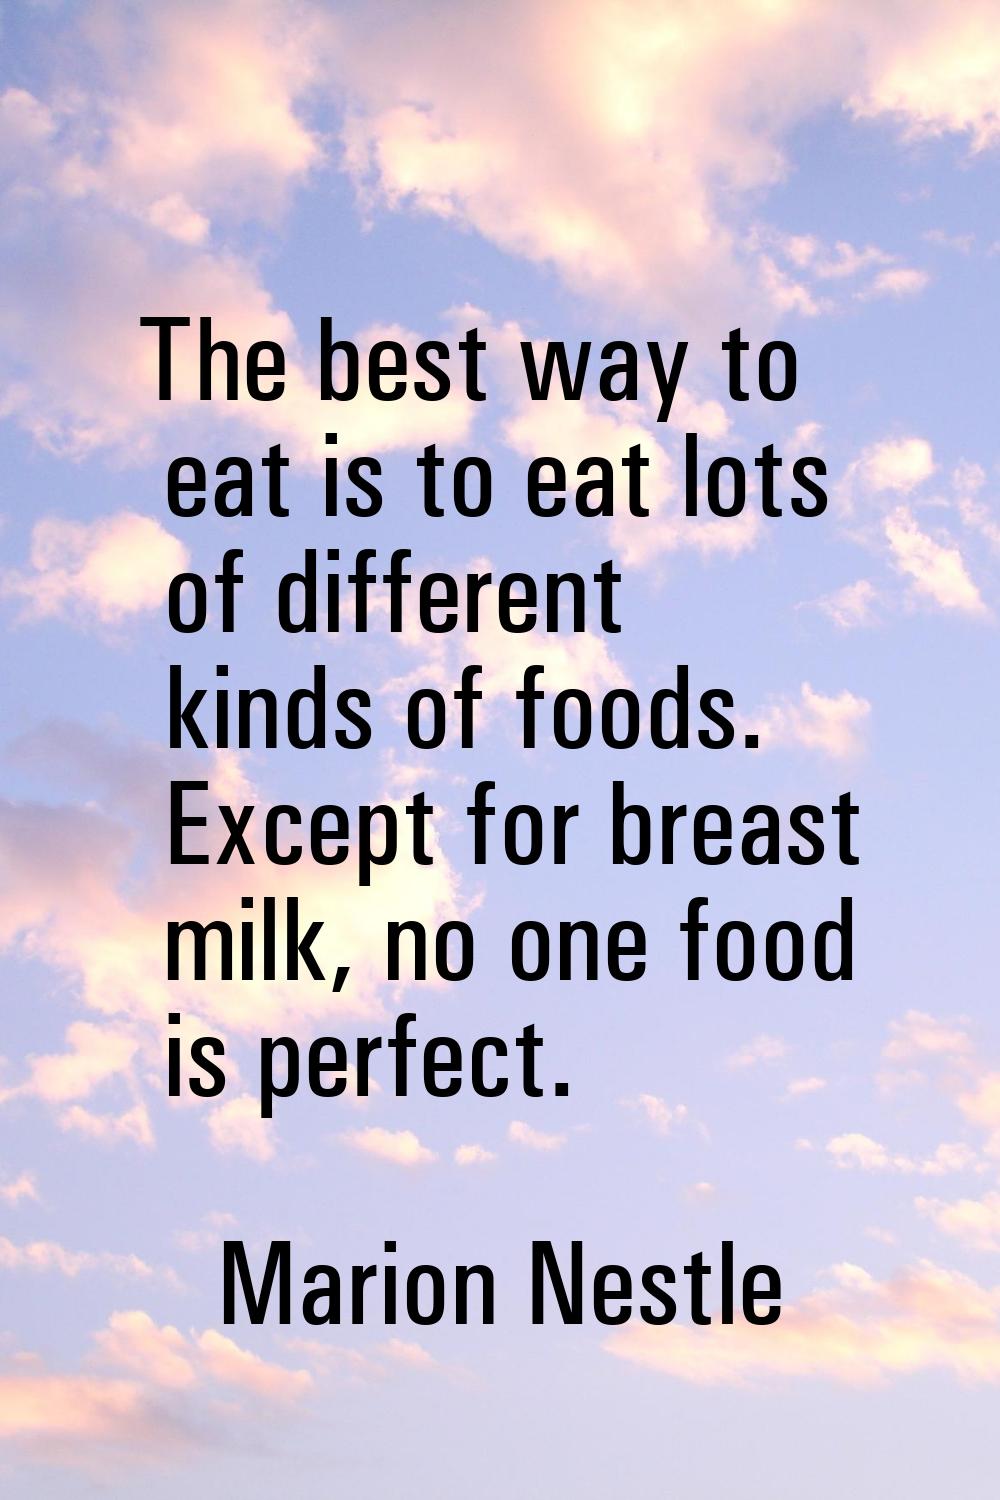 The best way to eat is to eat lots of different kinds of foods. Except for breast milk, no one food